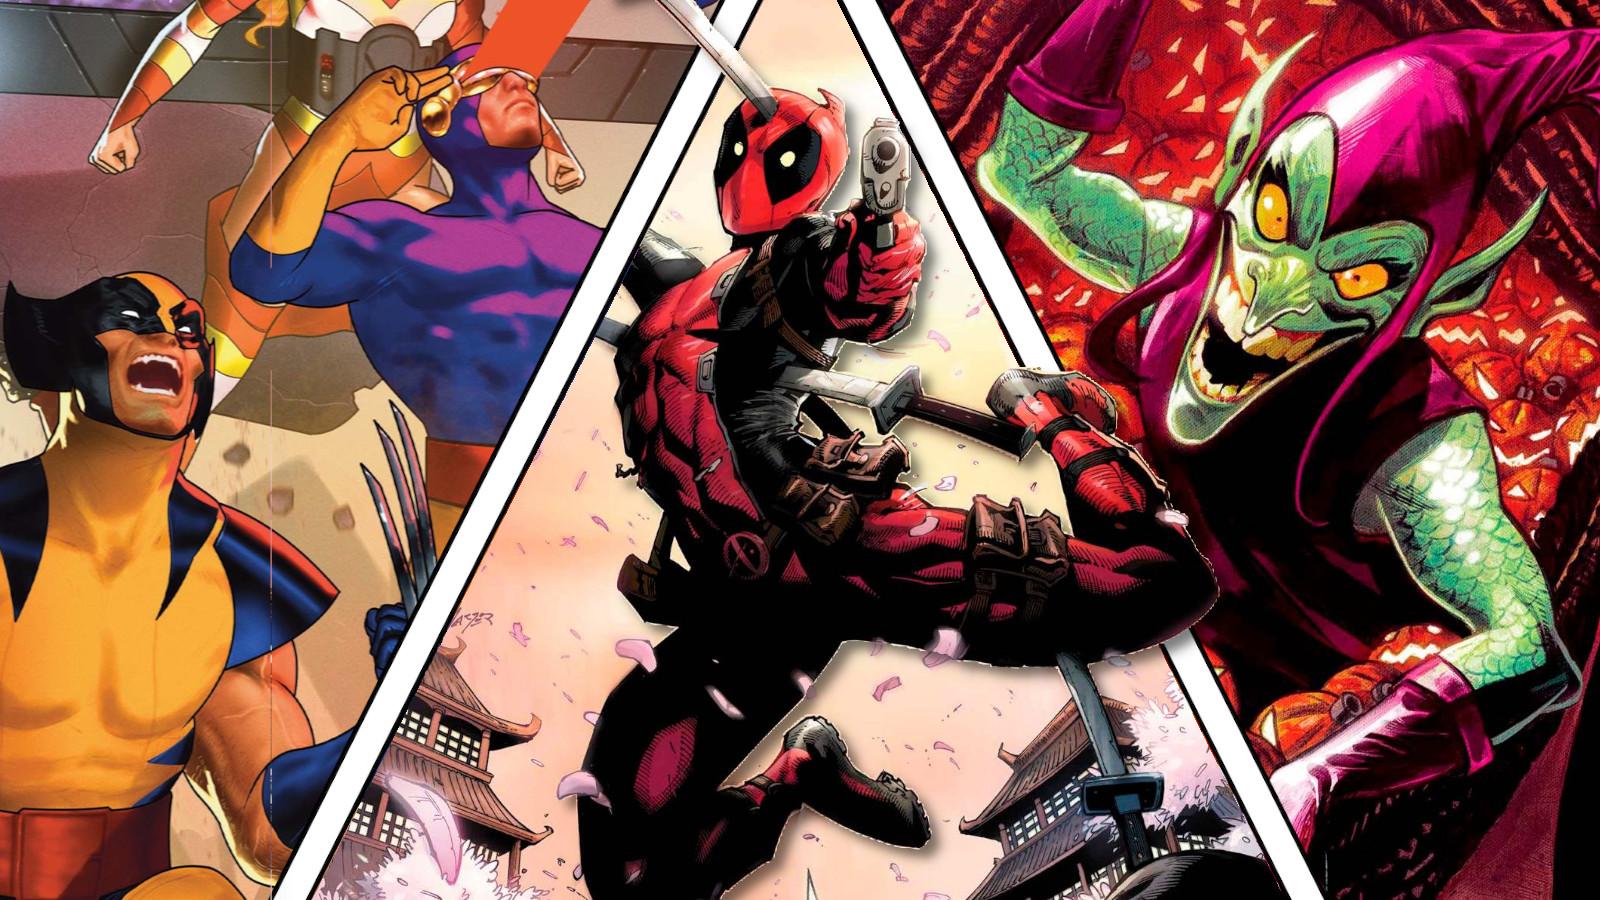 X-Men, Deadpool, and Spider-Man: Shadow of the Green Goblin variant covers